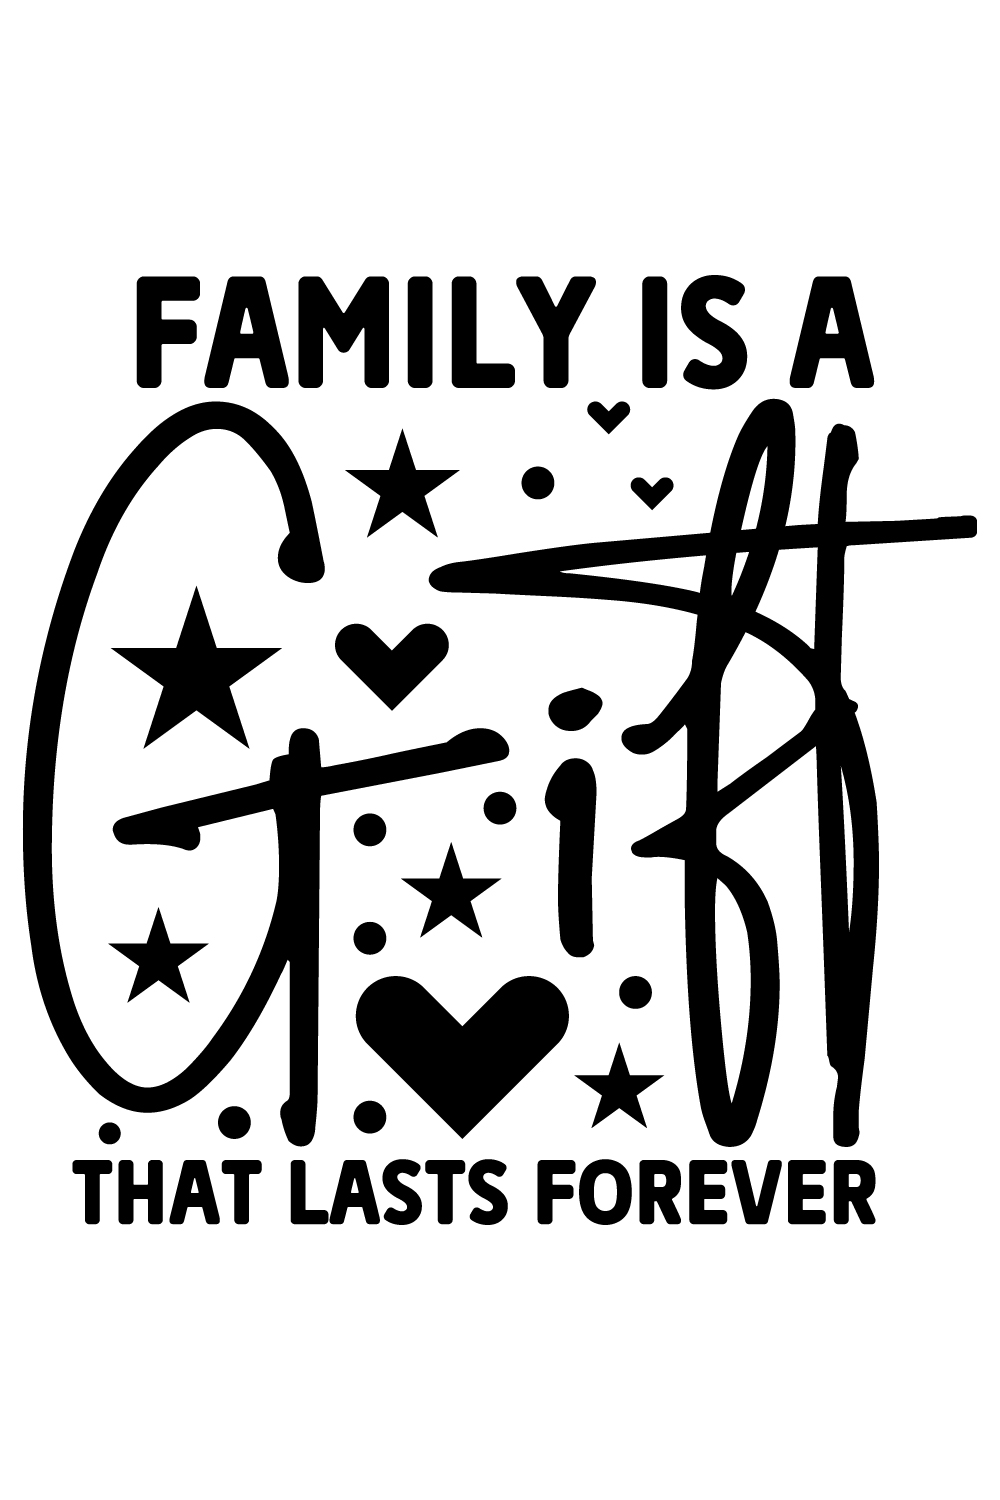 Family is a gift that lasts forever pinterest preview image.